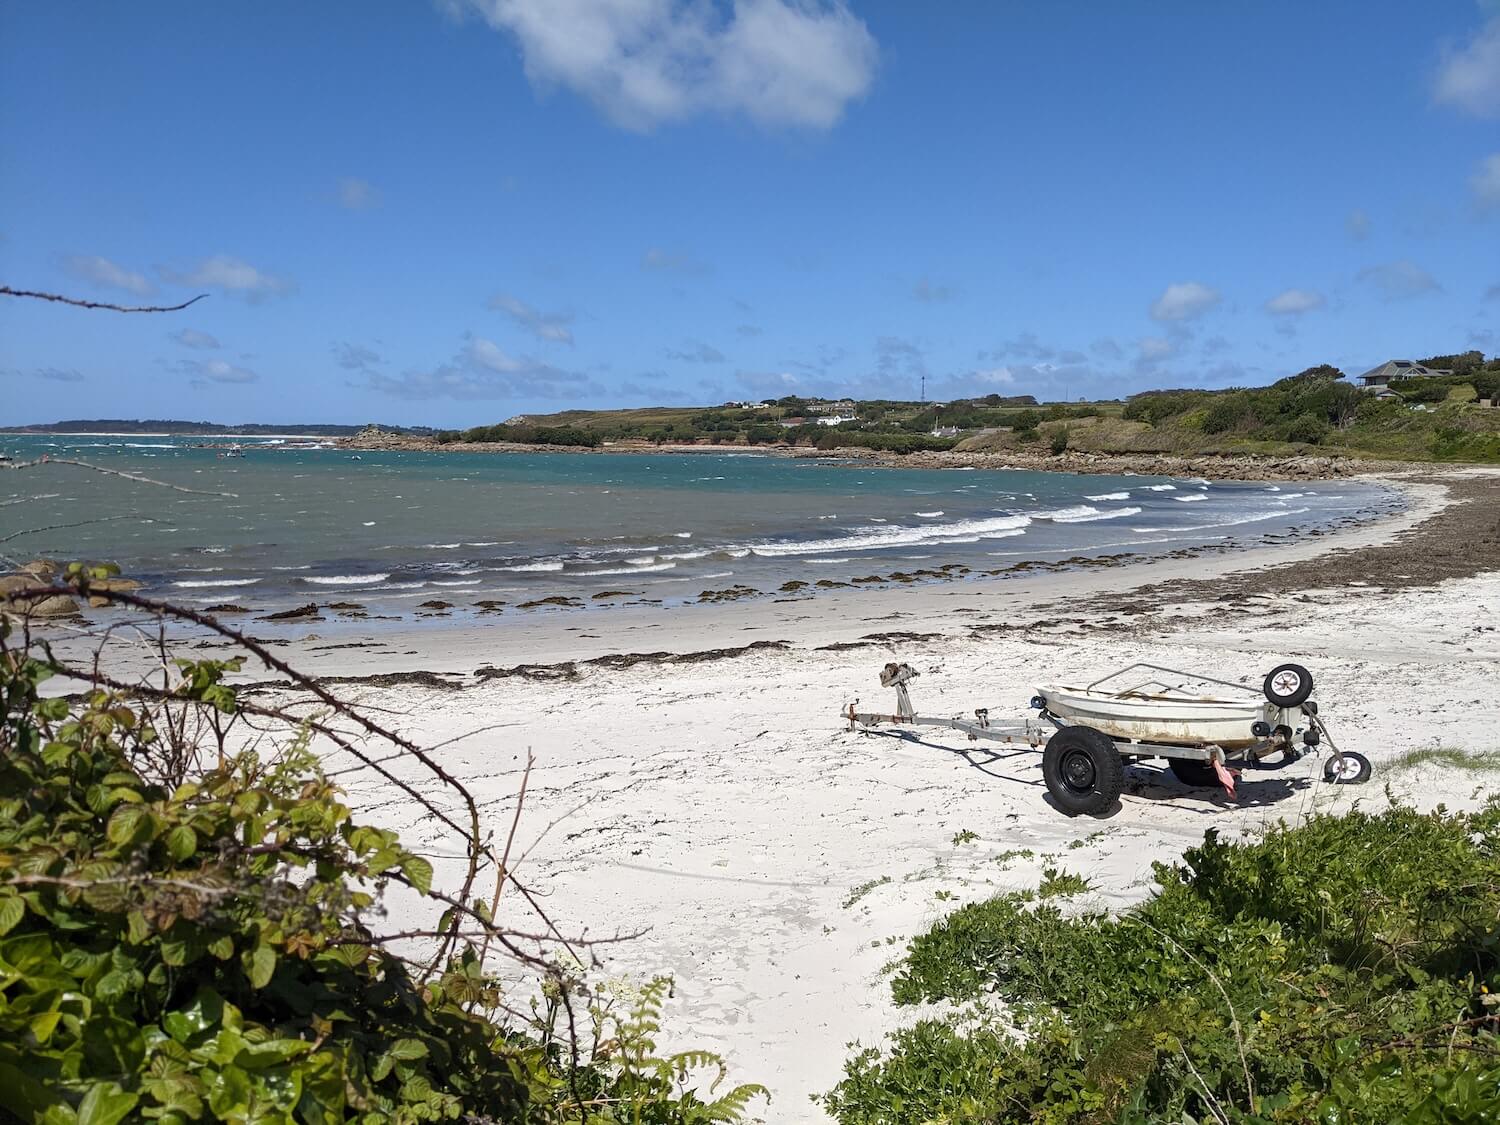 Views of the scilly isles